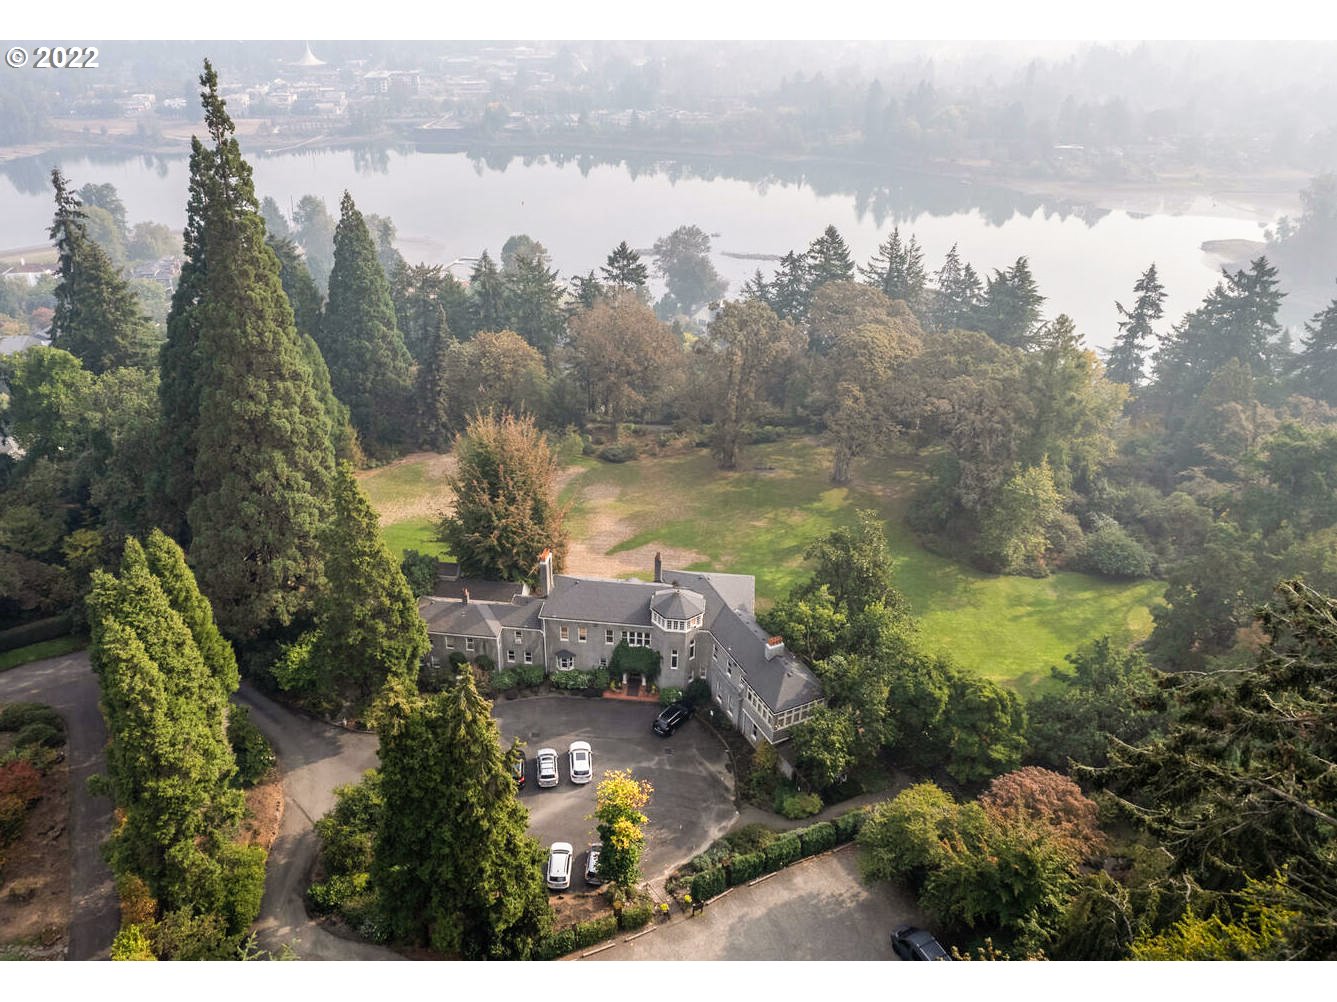 Presented to the market for the 1st time - simply nothing like it in the Portland Metro! This unique jewel offers almost 9 acres of exquisite English gardens & river-view walks. The grand main residence features Mt Hood views, rich millwork, soaring ceilings, vast dining hall, guest qtrs, and is currently in use as Diocese offices. Develop this unequalled parcel, restore the home to its original splendor, or create your custom vision in the heart of beloved Dunthorpe. Top Riverdale Schools!